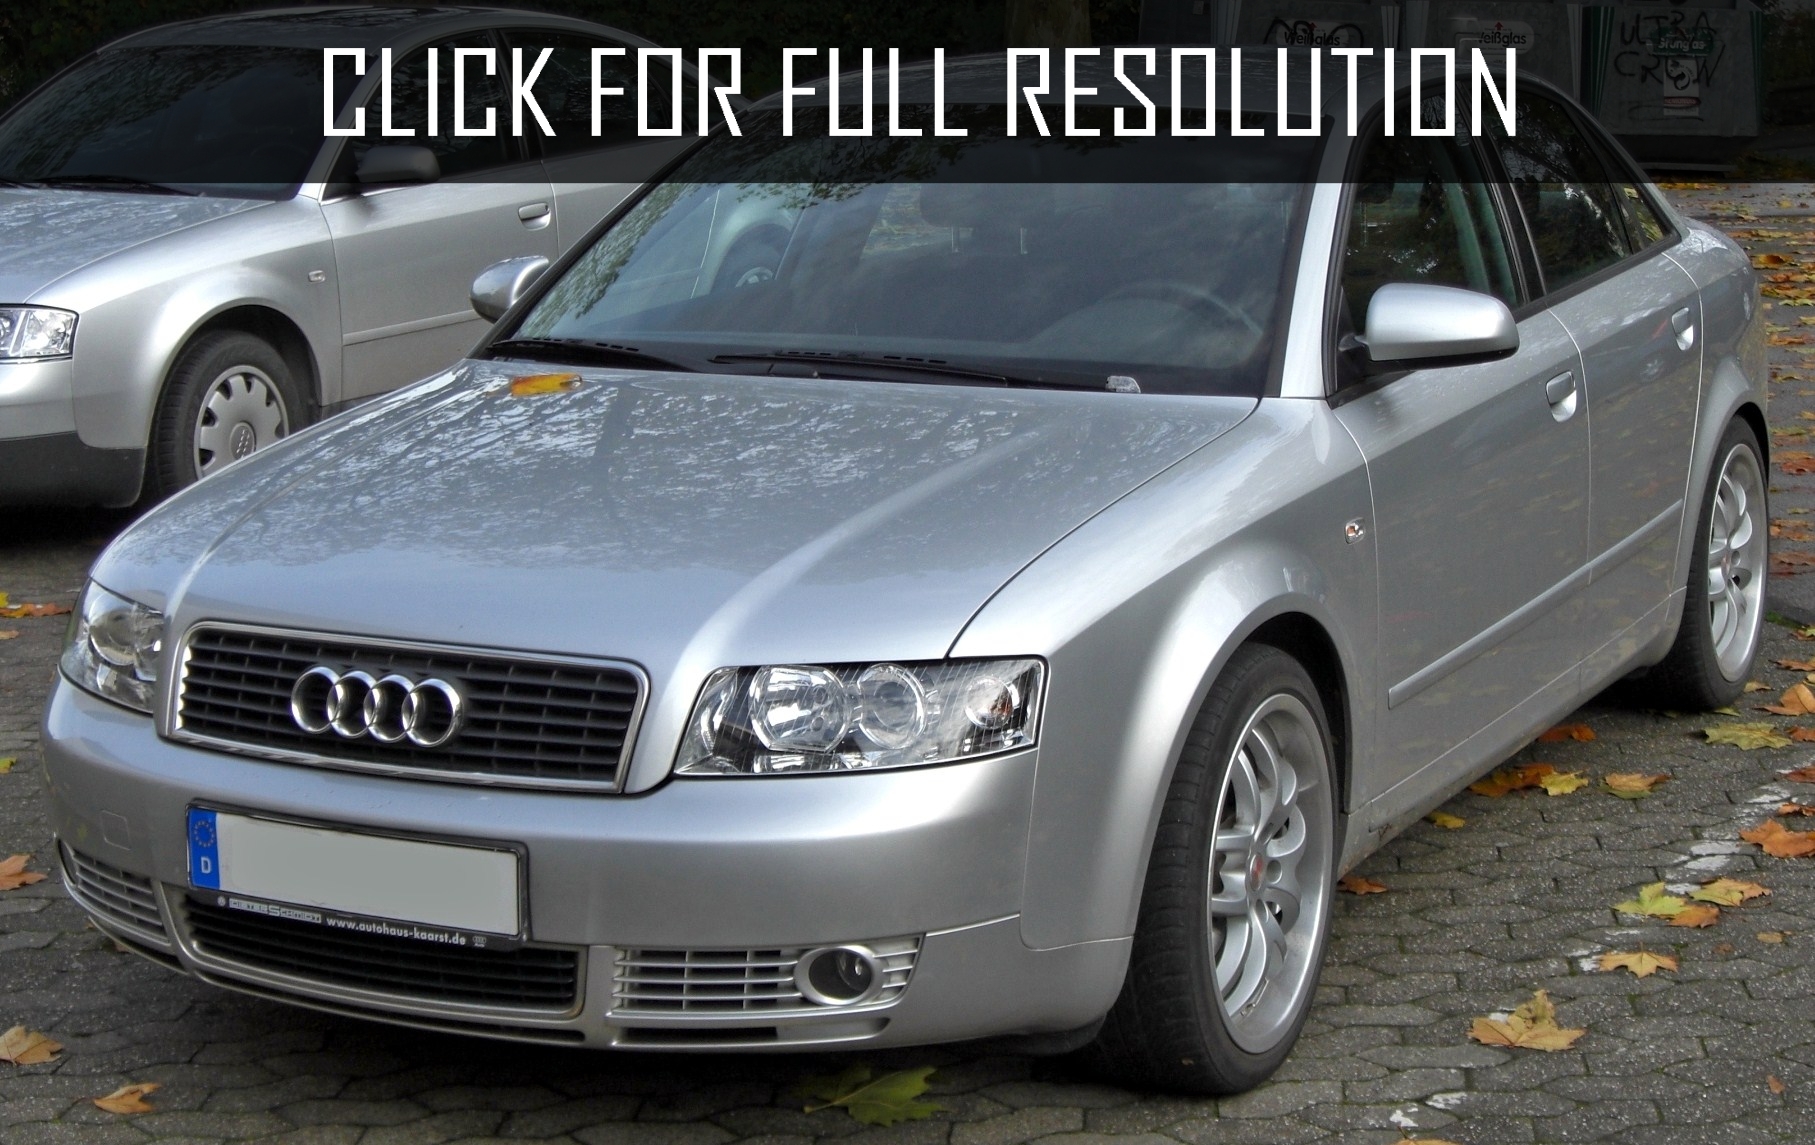 2004 Audi A4 news, reviews, msrp, ratings with amazing images